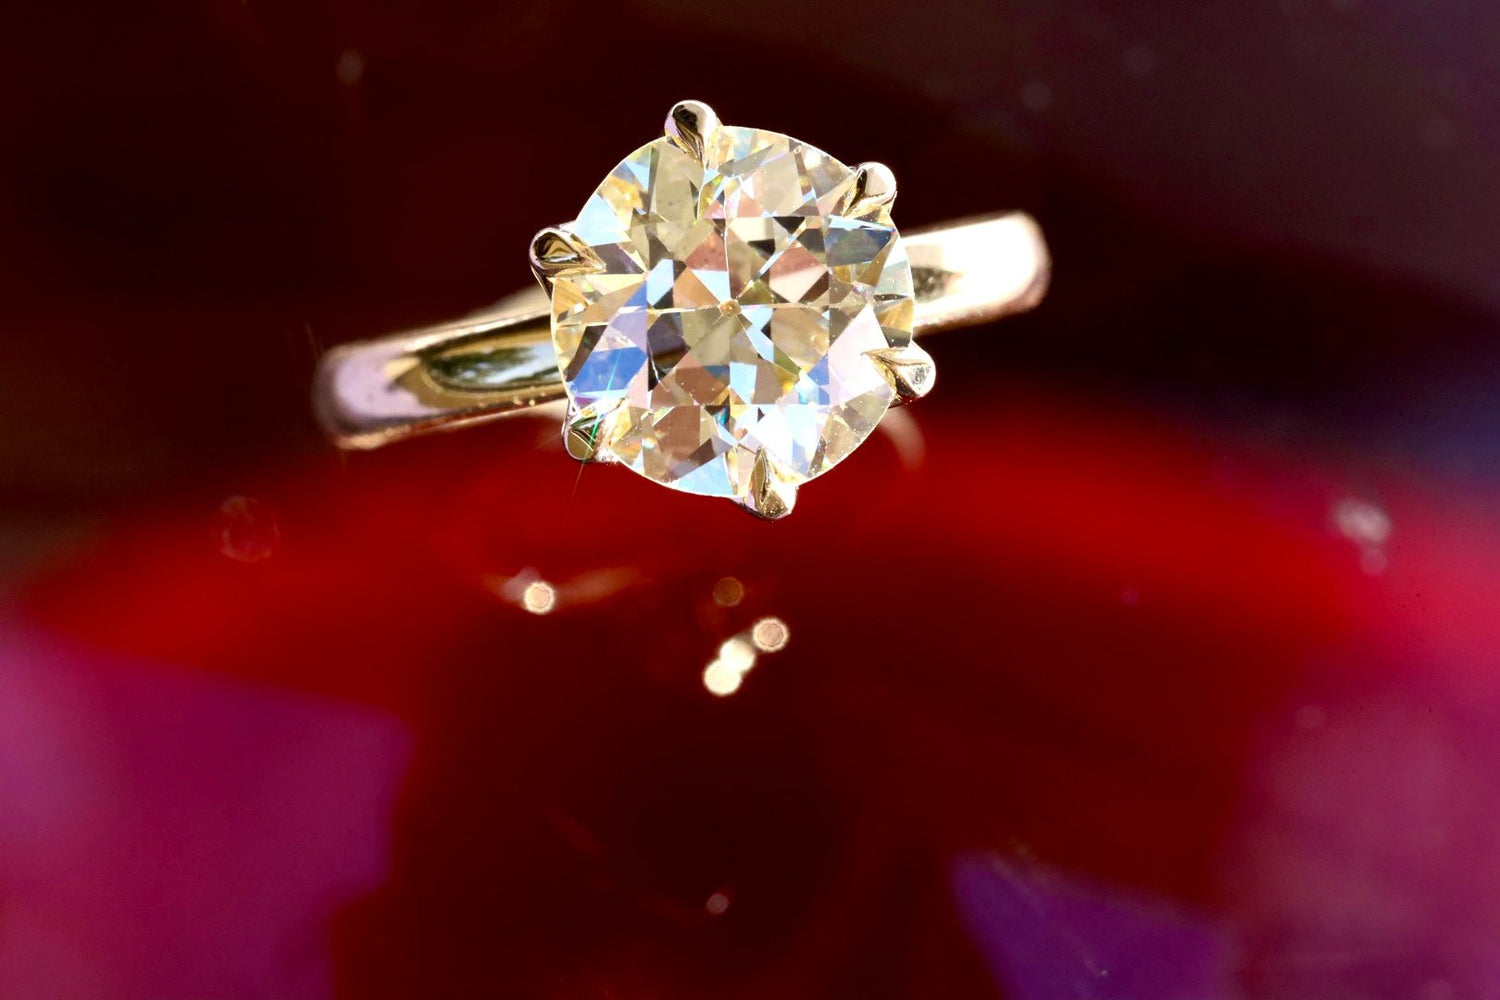 close up of an old European cut diamond engagement ring against a blurry red background